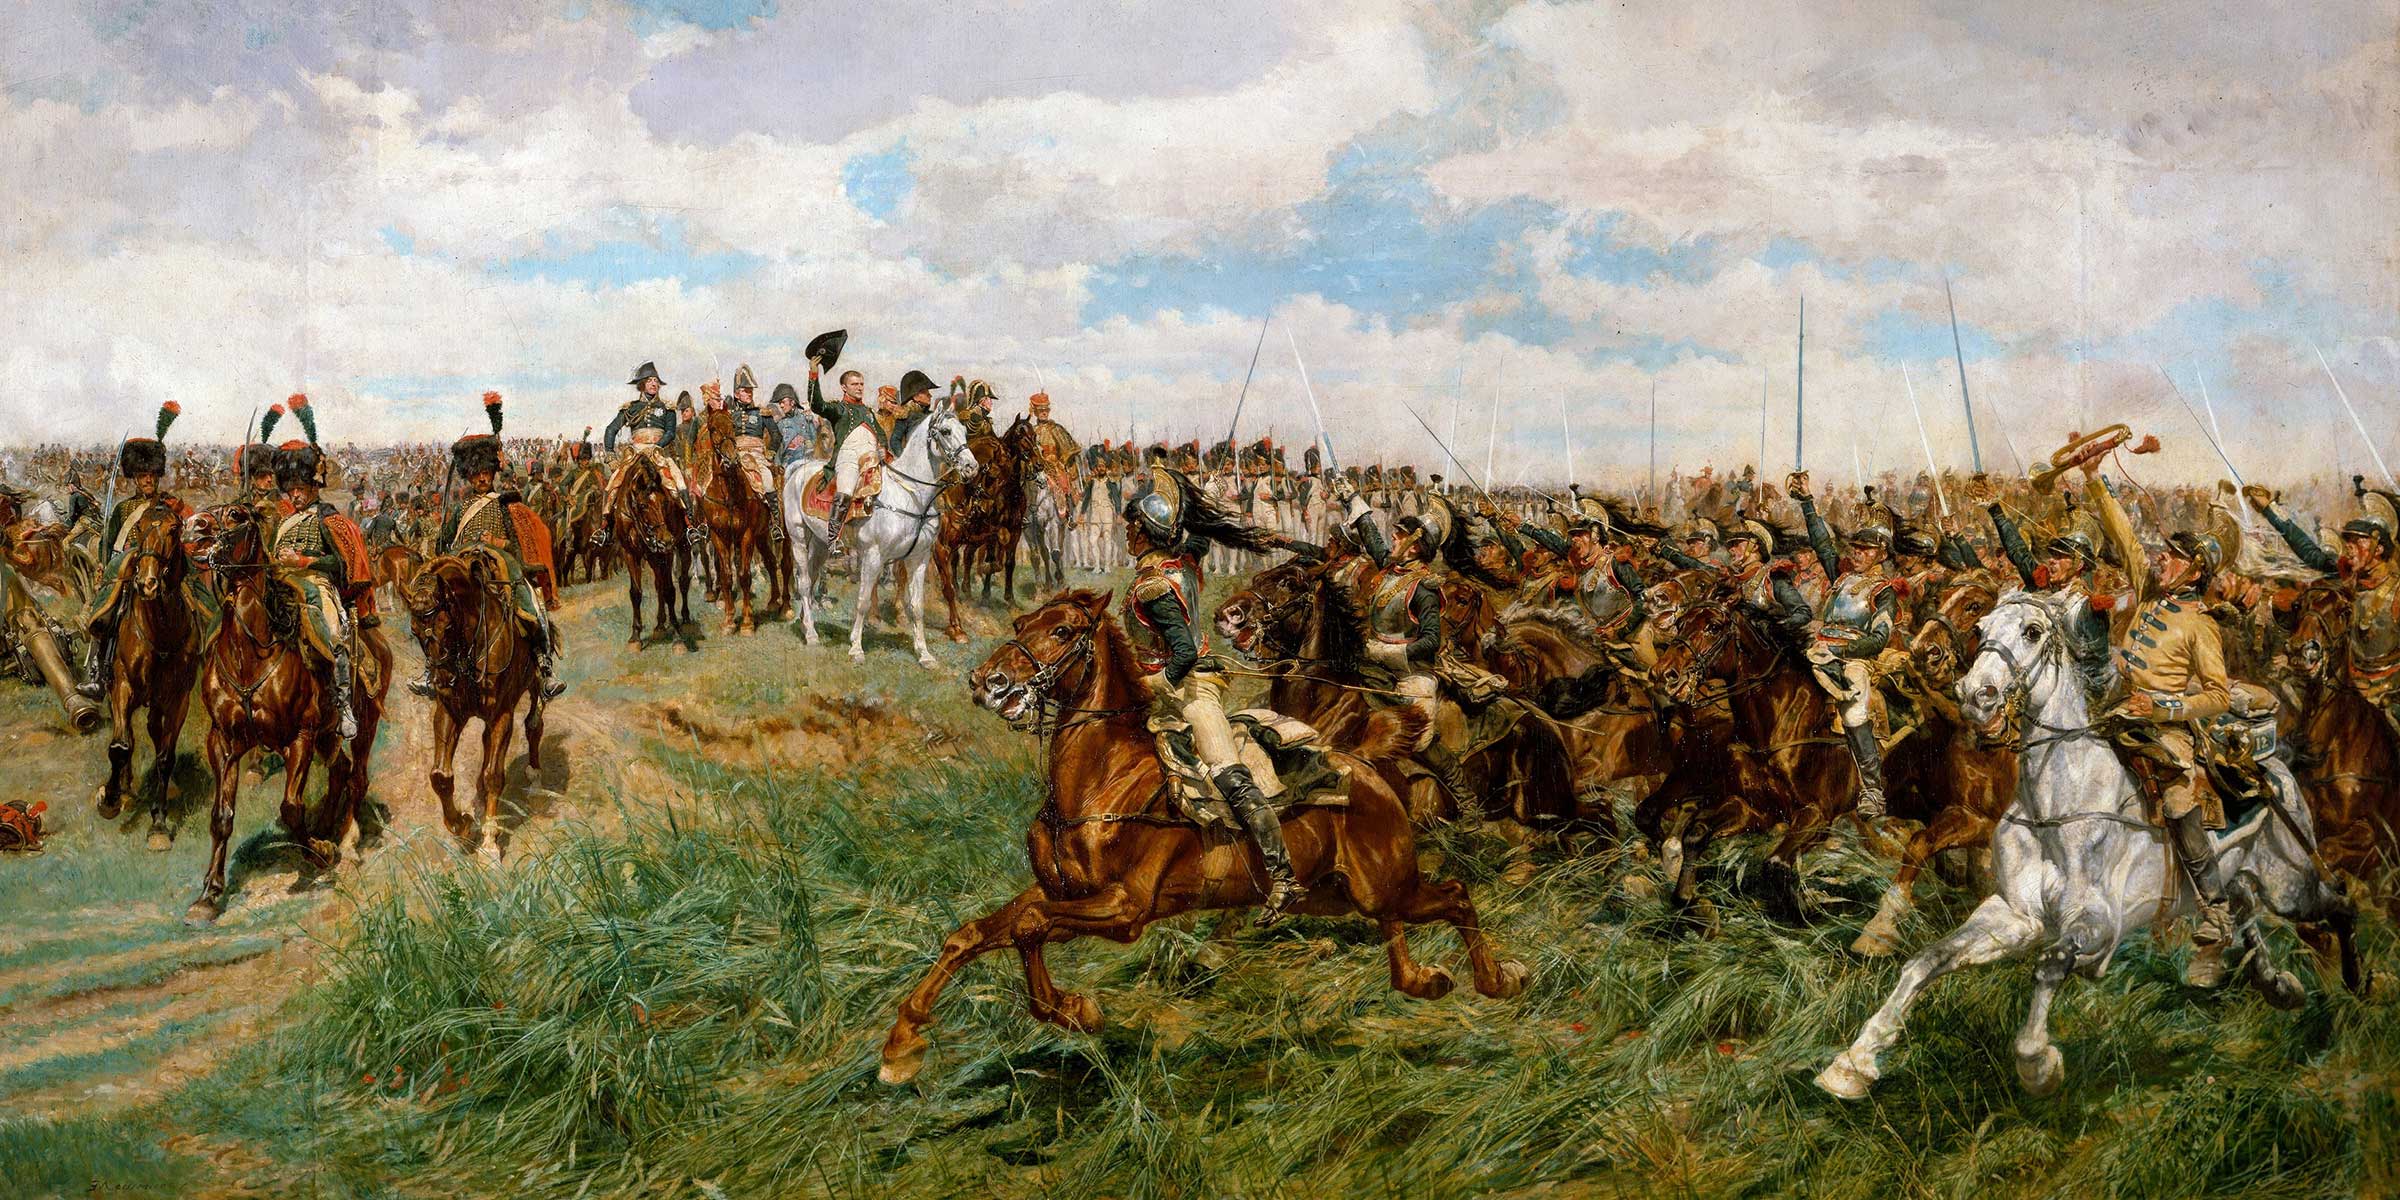 Painting of Napoleon leading an army on horseback